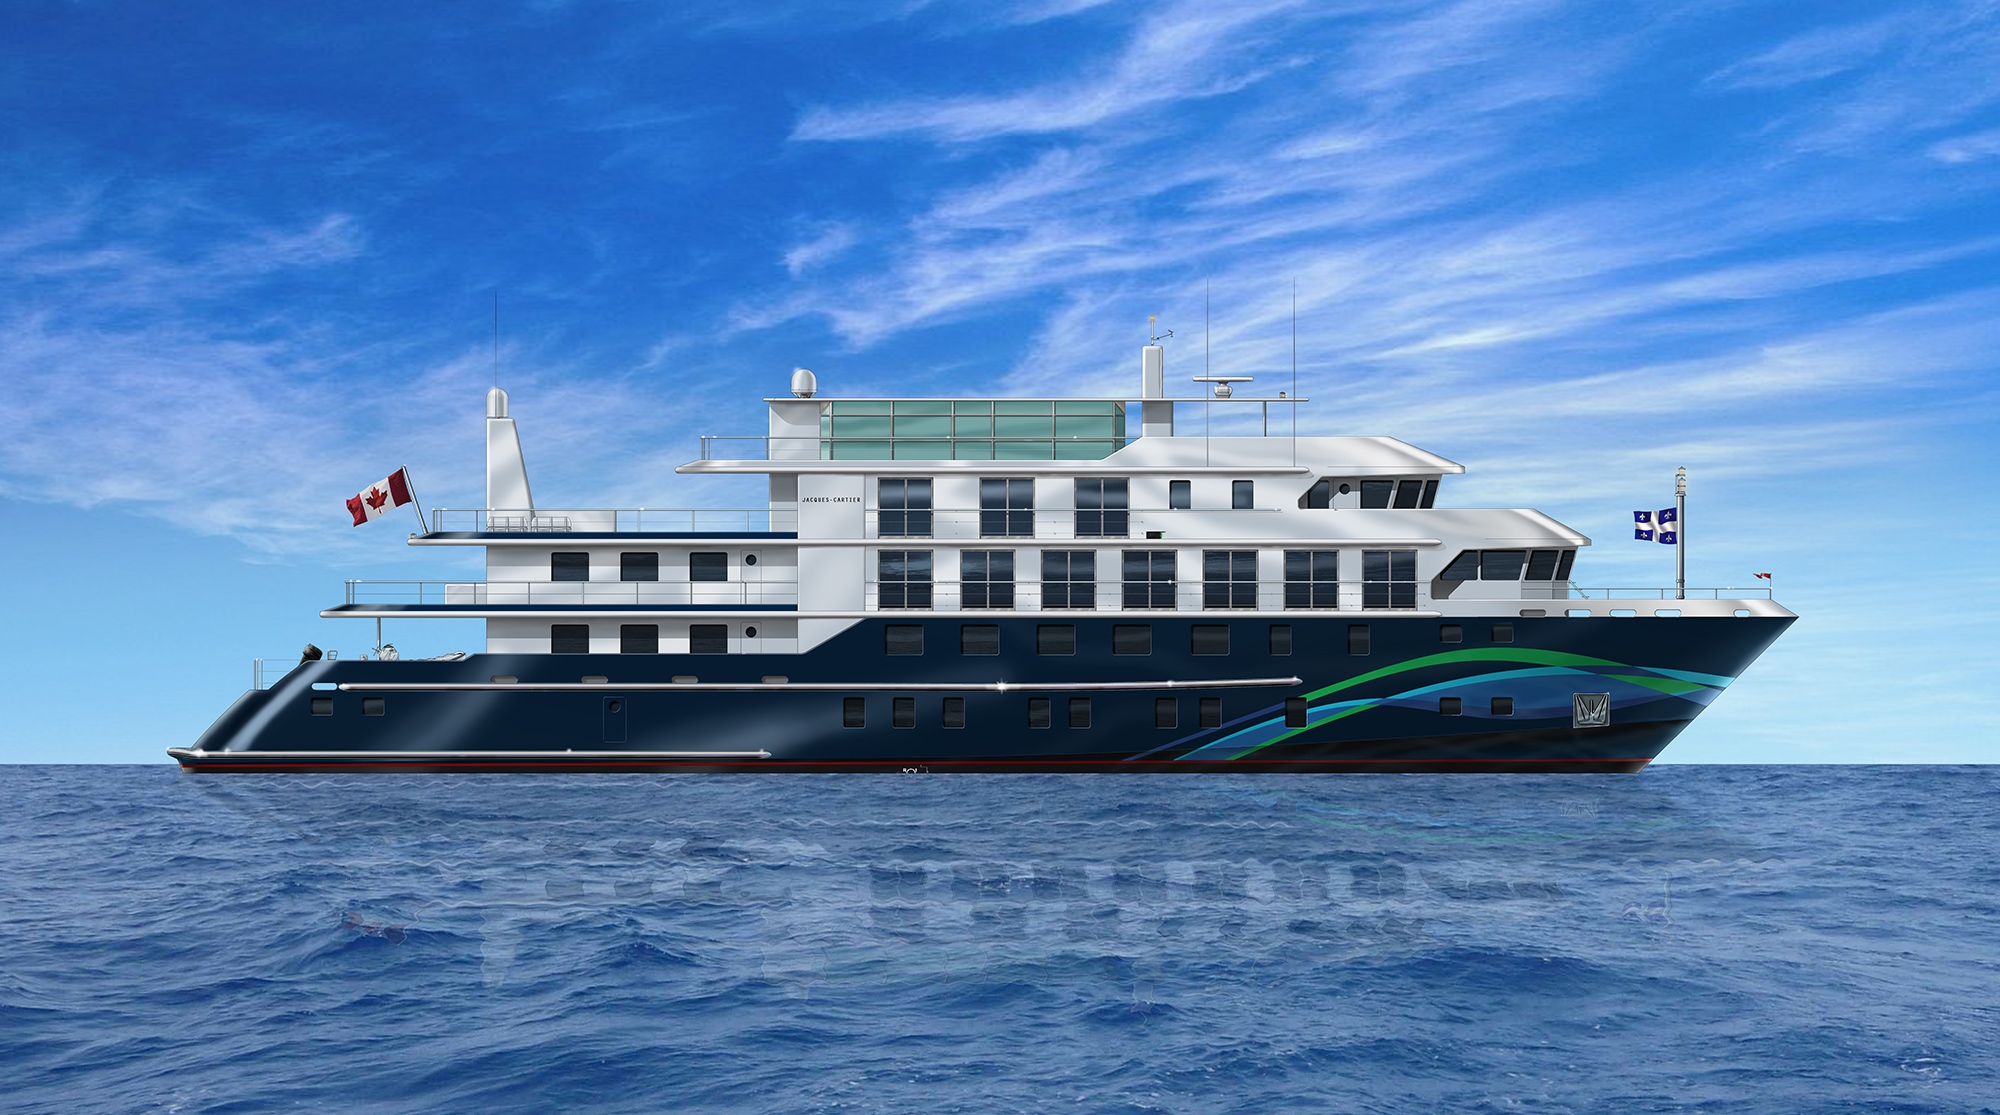 New active cruise concept to debut on the St. Lawrence seatrade